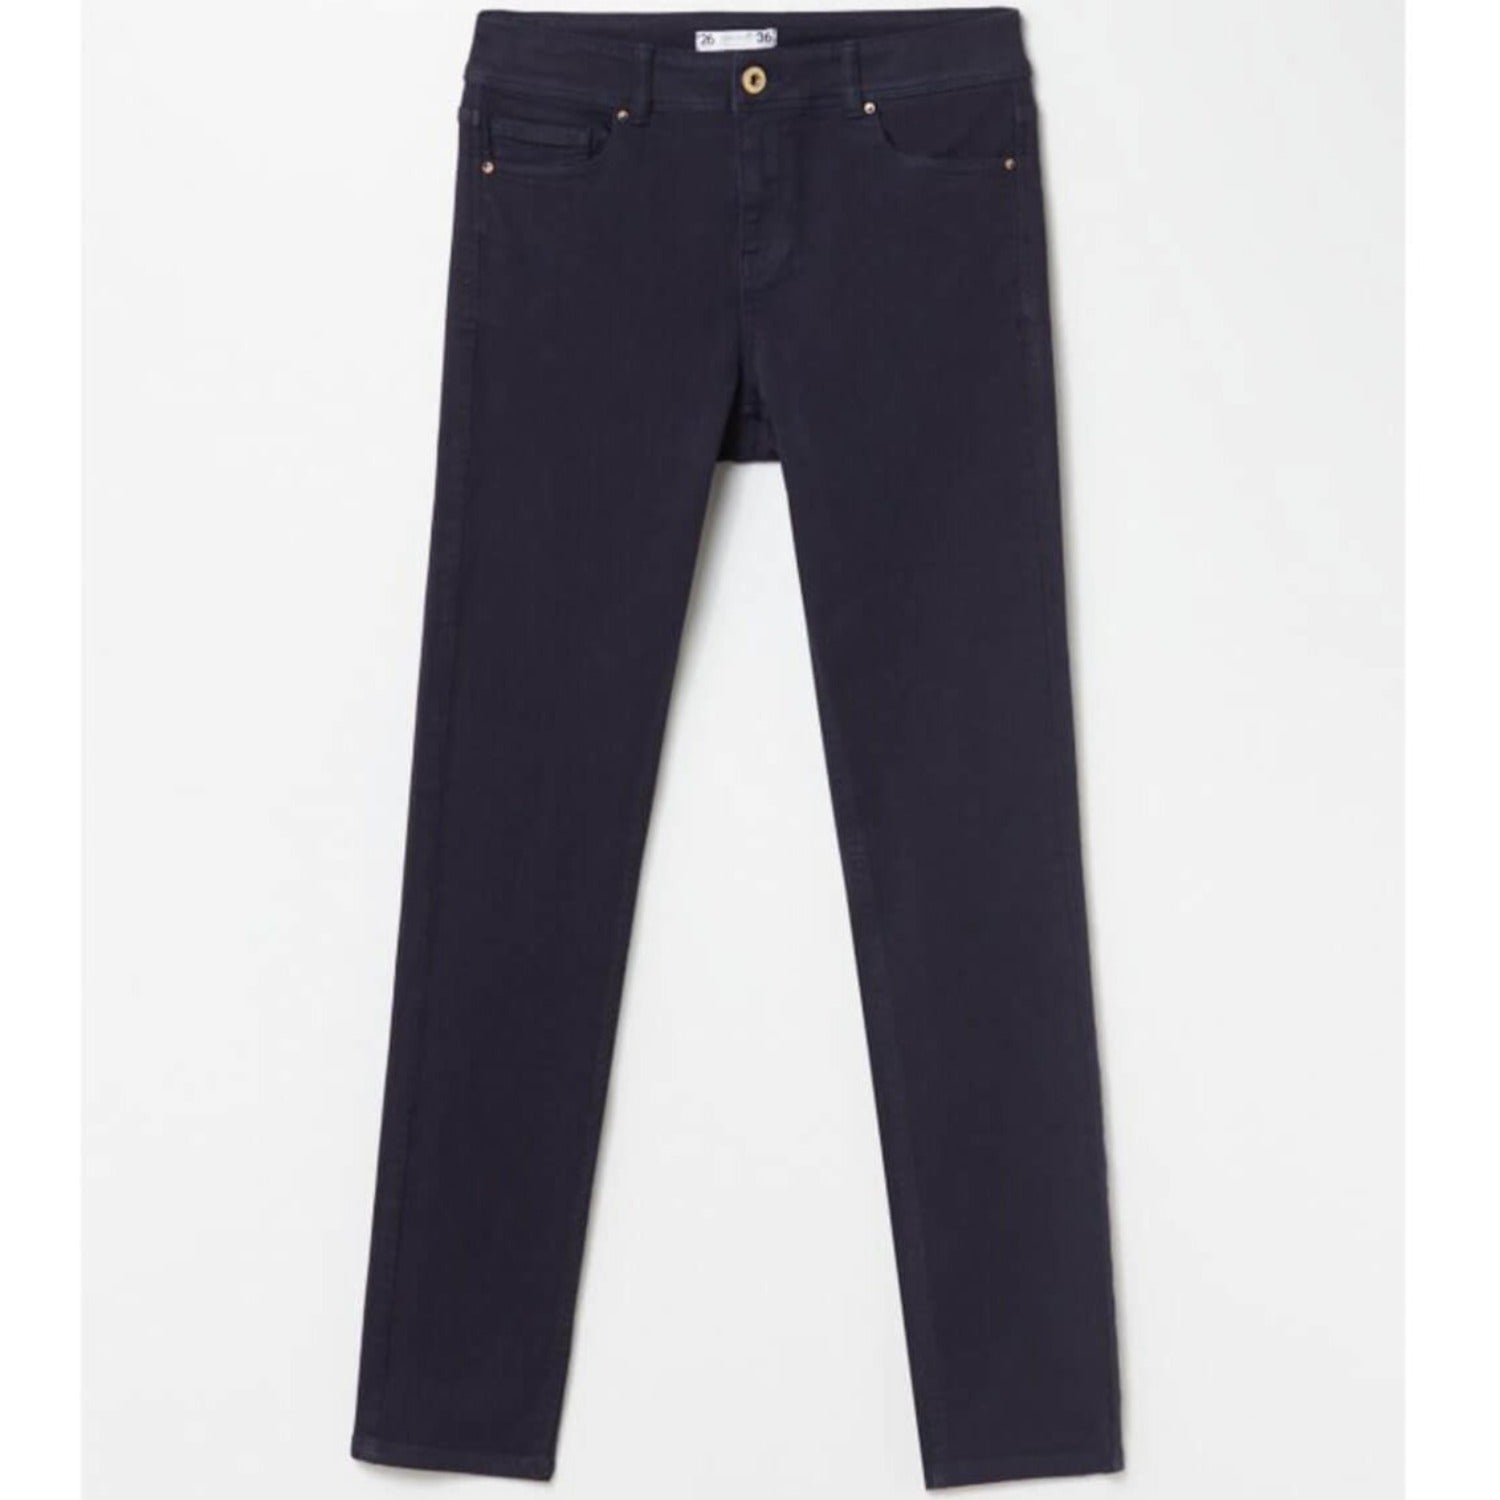 Sfera Coloured Skinny Jeans - Night 1 Shaws Department Stores